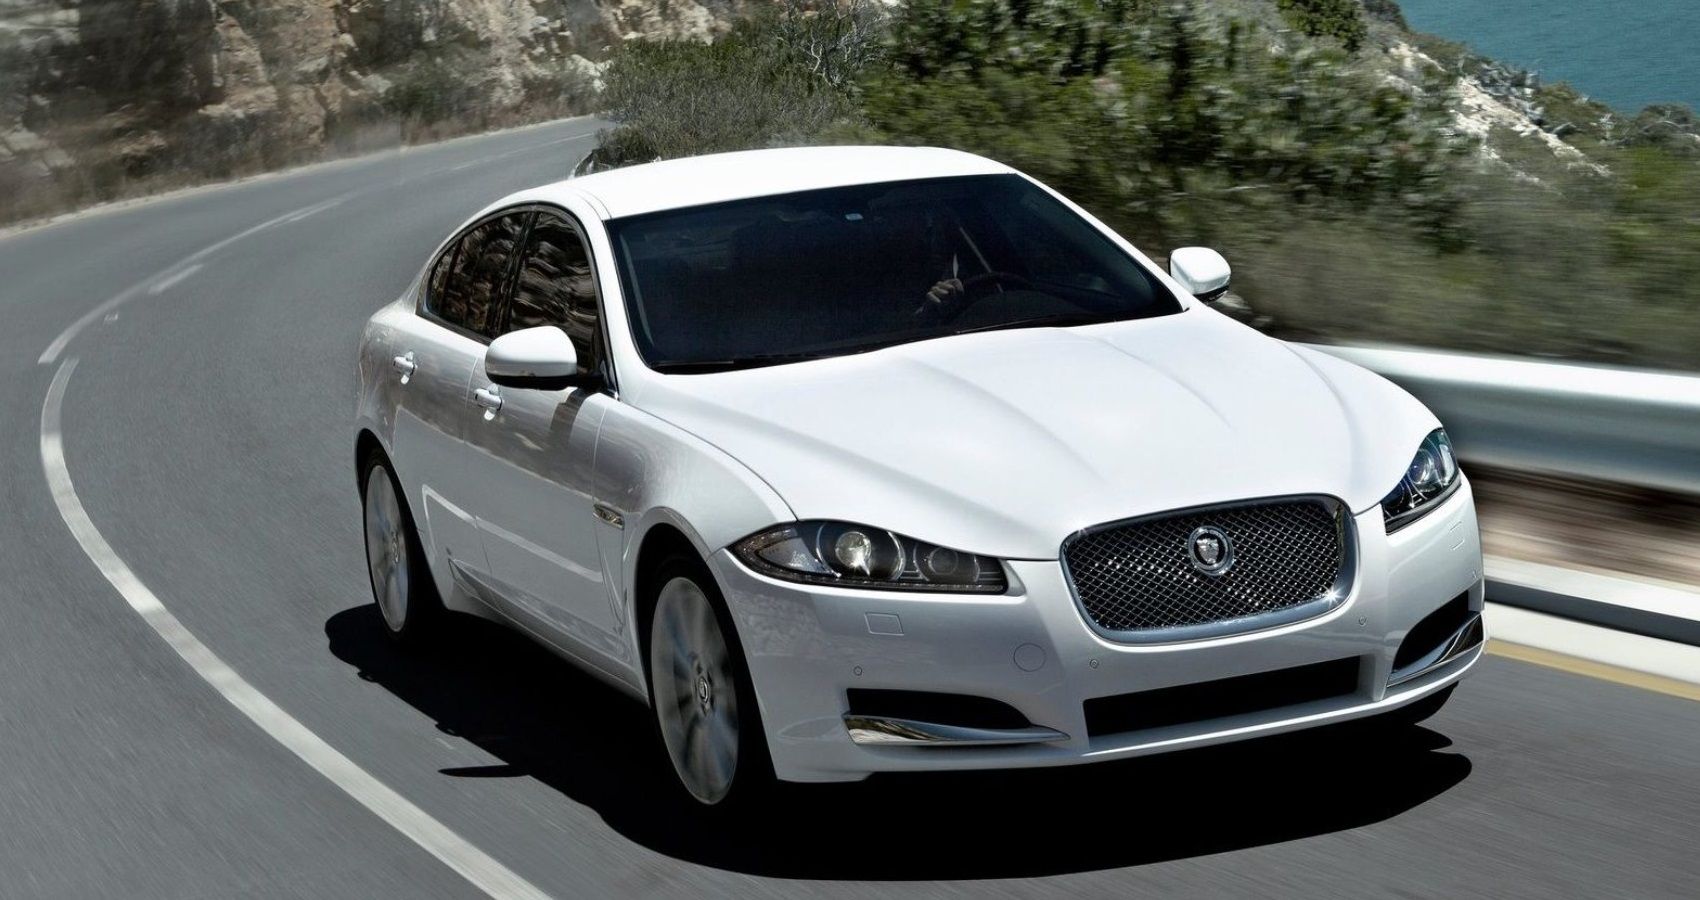 10 Reasons Why We Love The Jaguar XF Supercharged